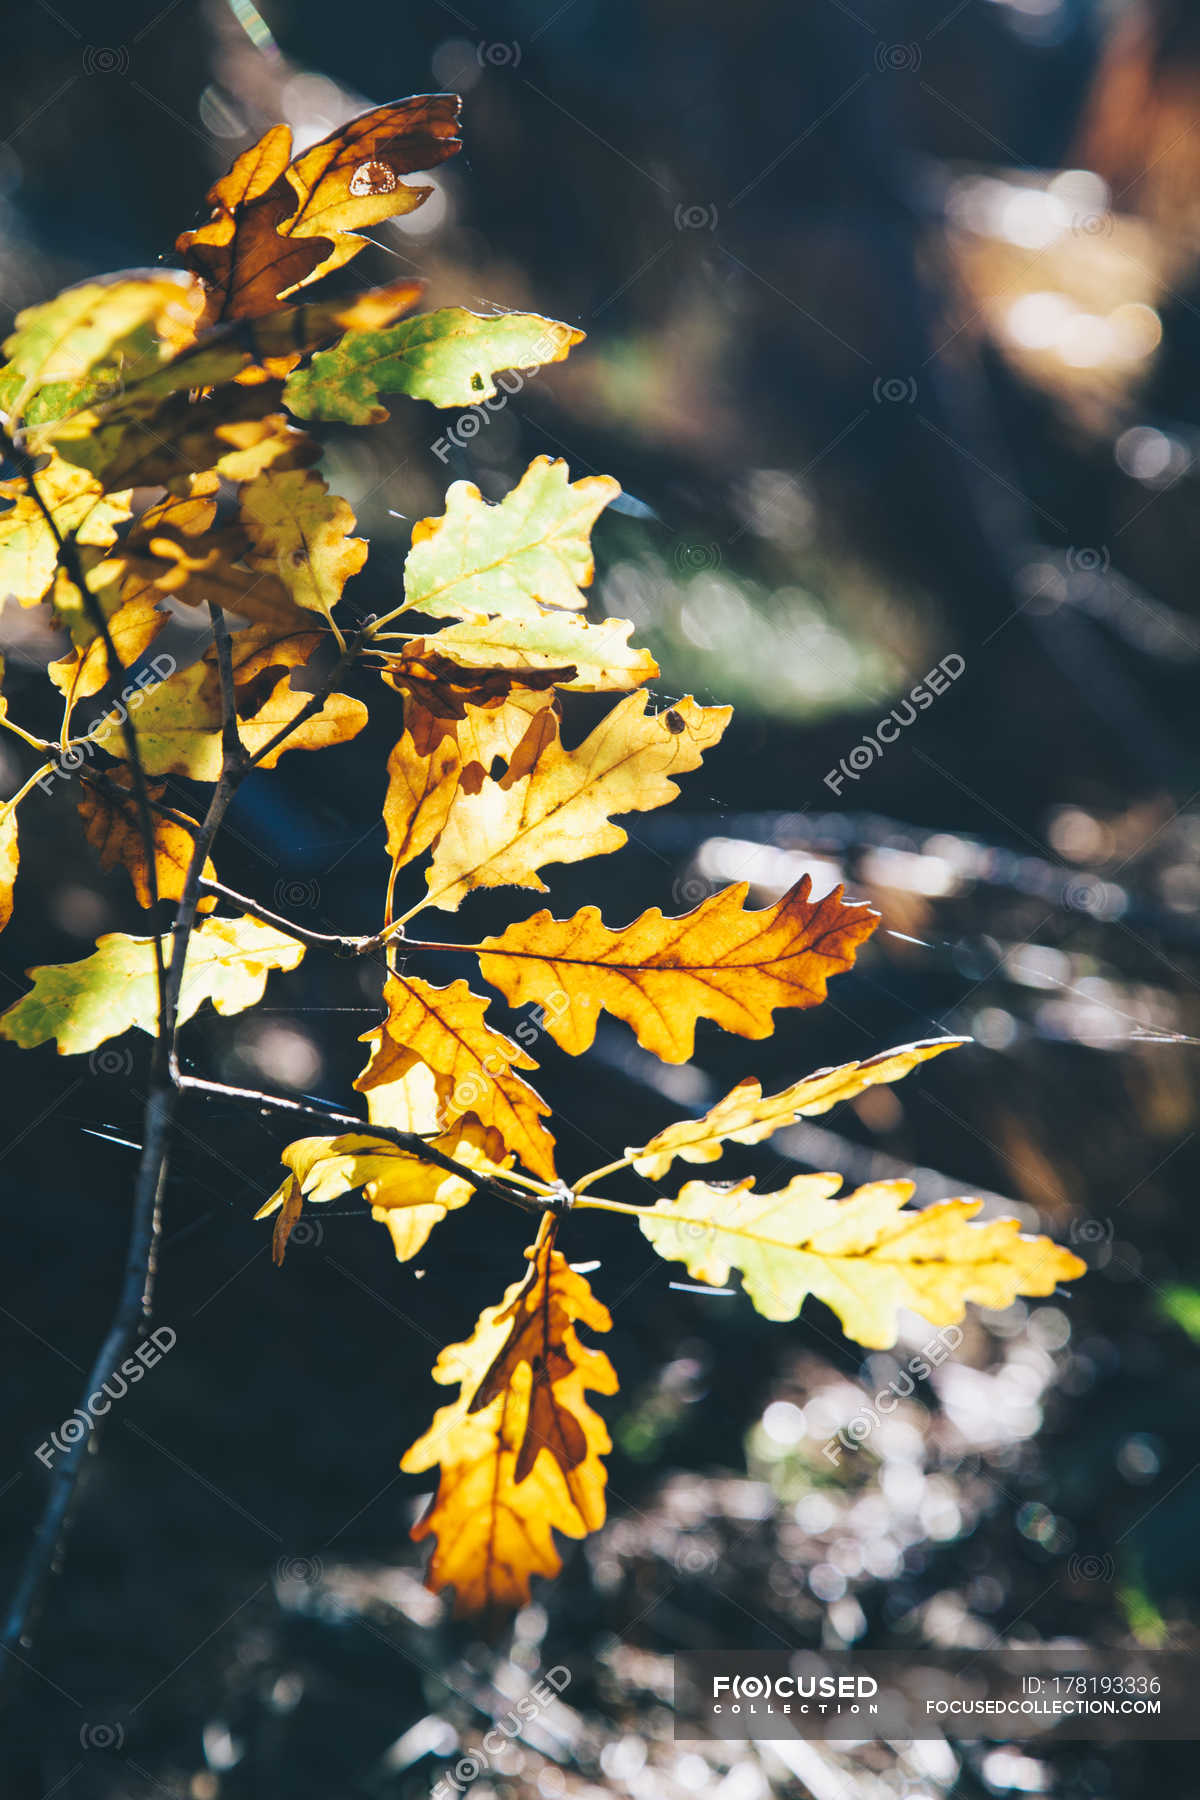 Autumn leaves outdoors on blurred background — autumn leaf, beauty of  nature - Stock Photo | #178193336